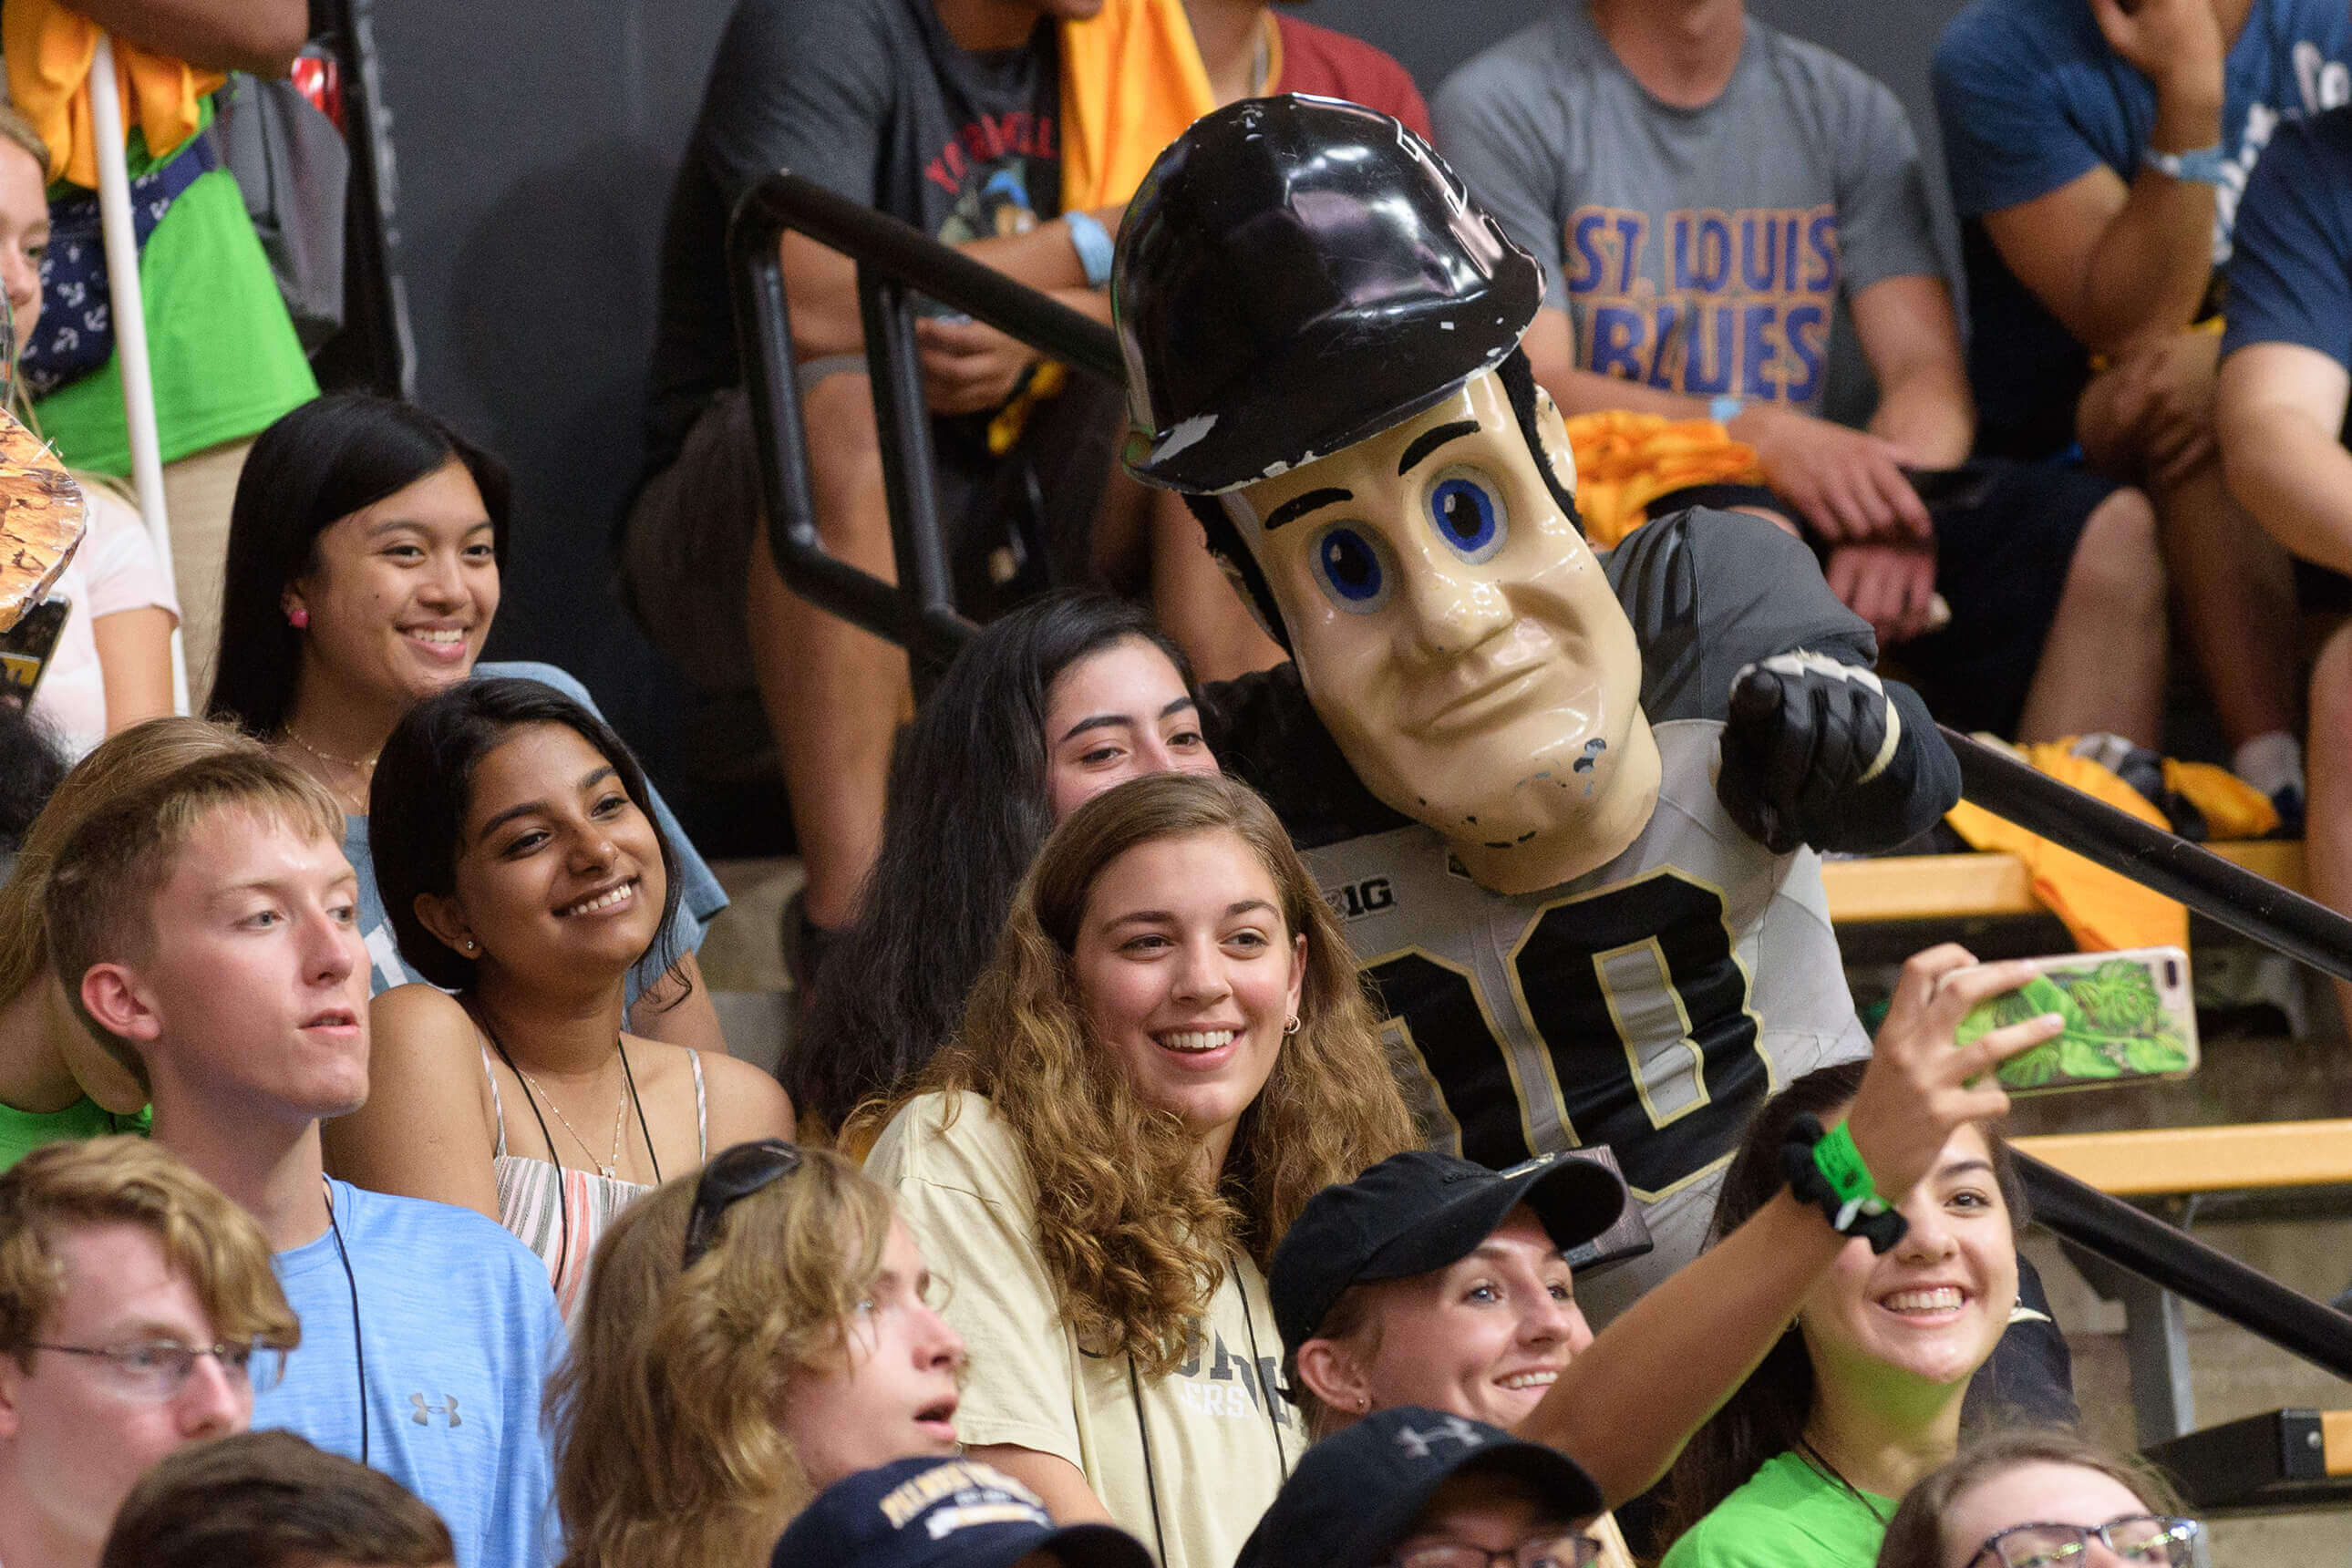 More than 7,000 students expected to participate Boiler Gold